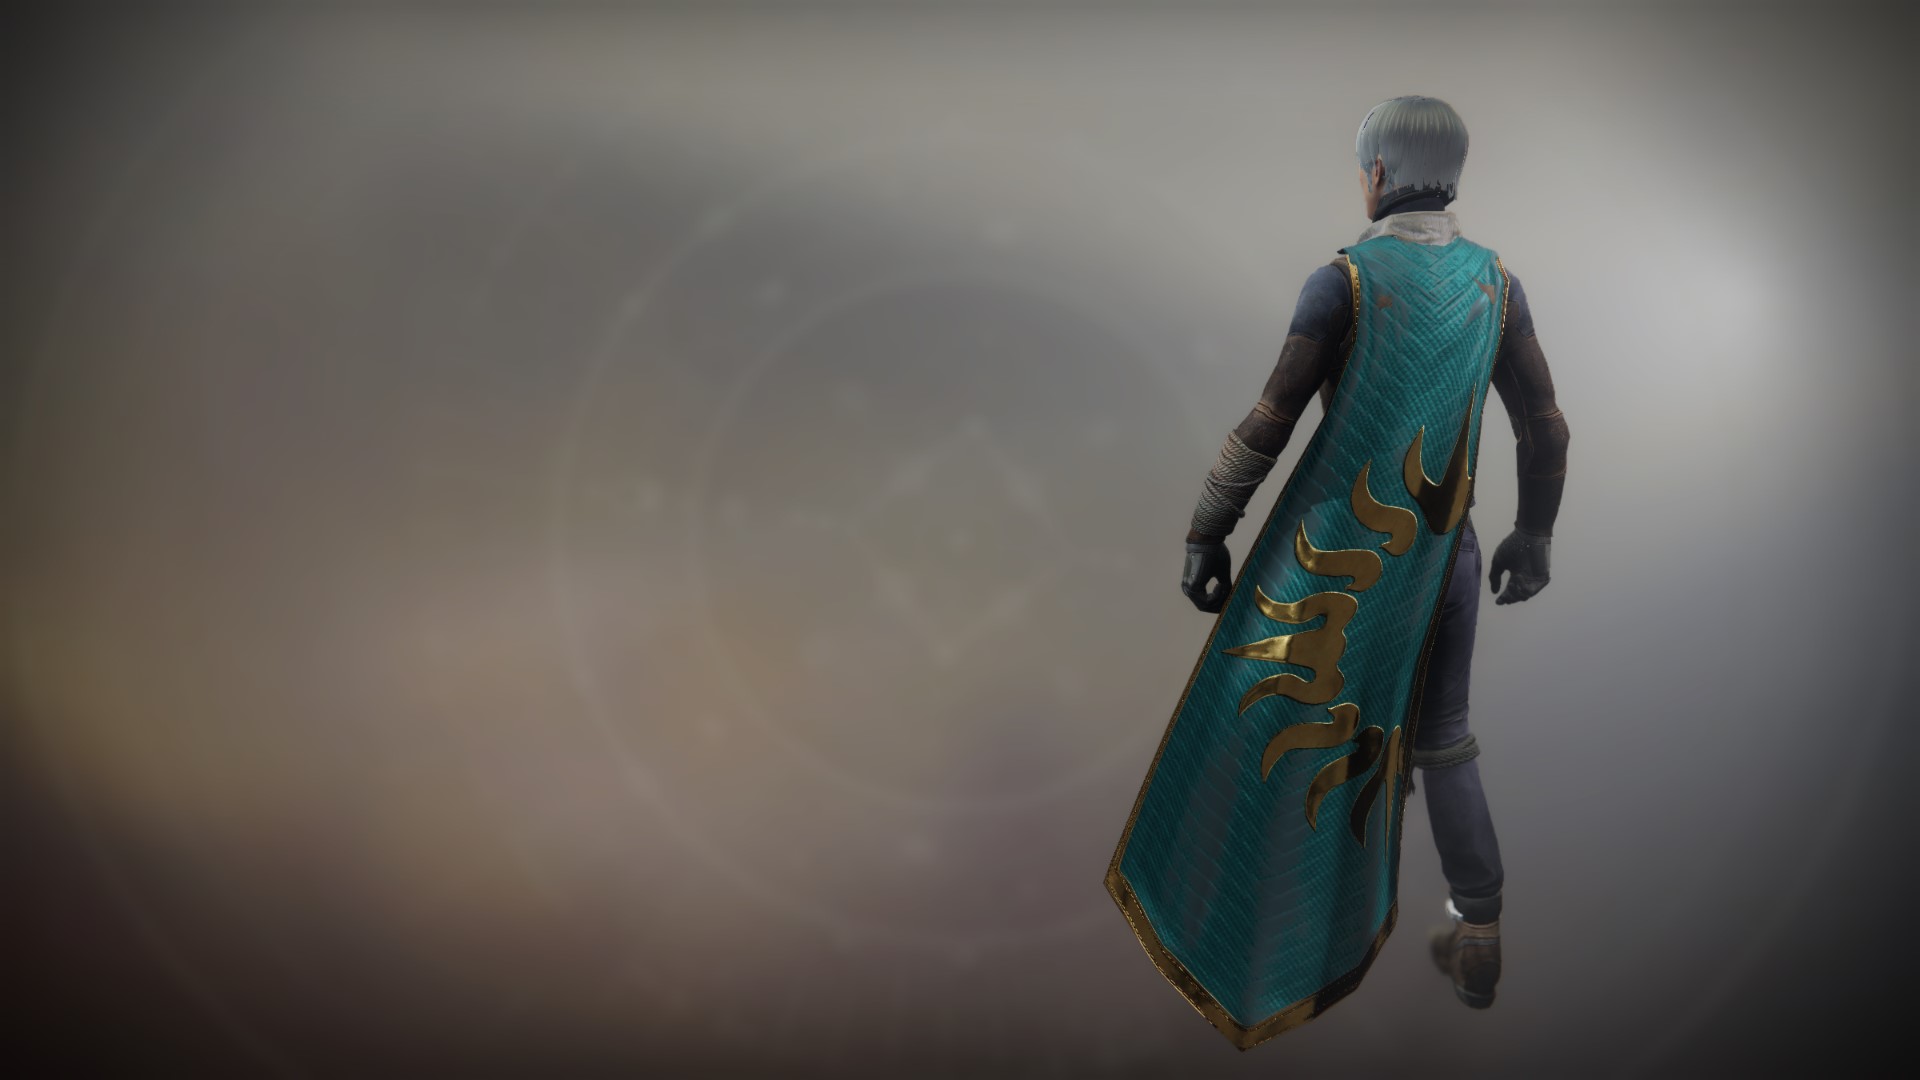 An in-game render of the Cloak of the Exile.